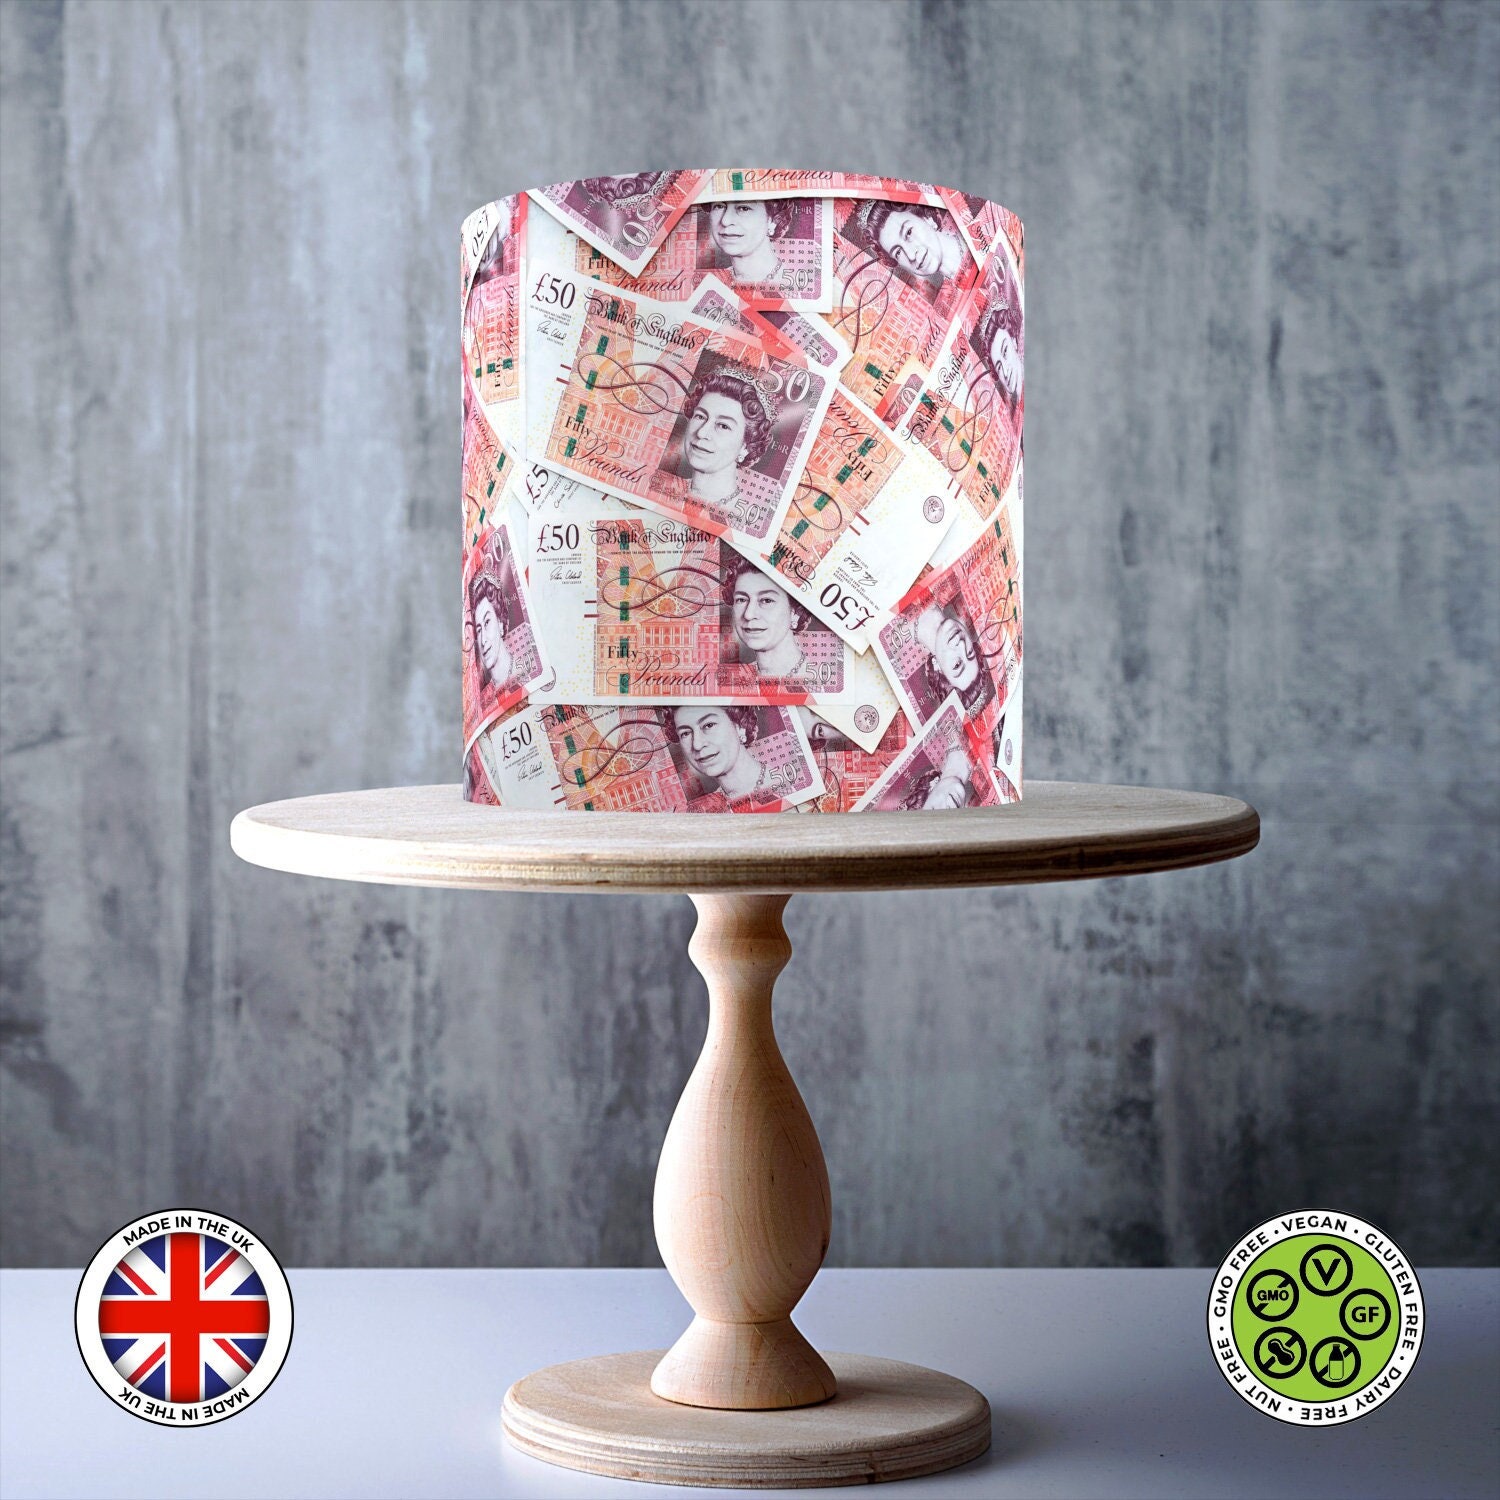 Edible Money / Edible Cashicing Sheets or Wafer Paper50s, 100s, Bills, Fans  